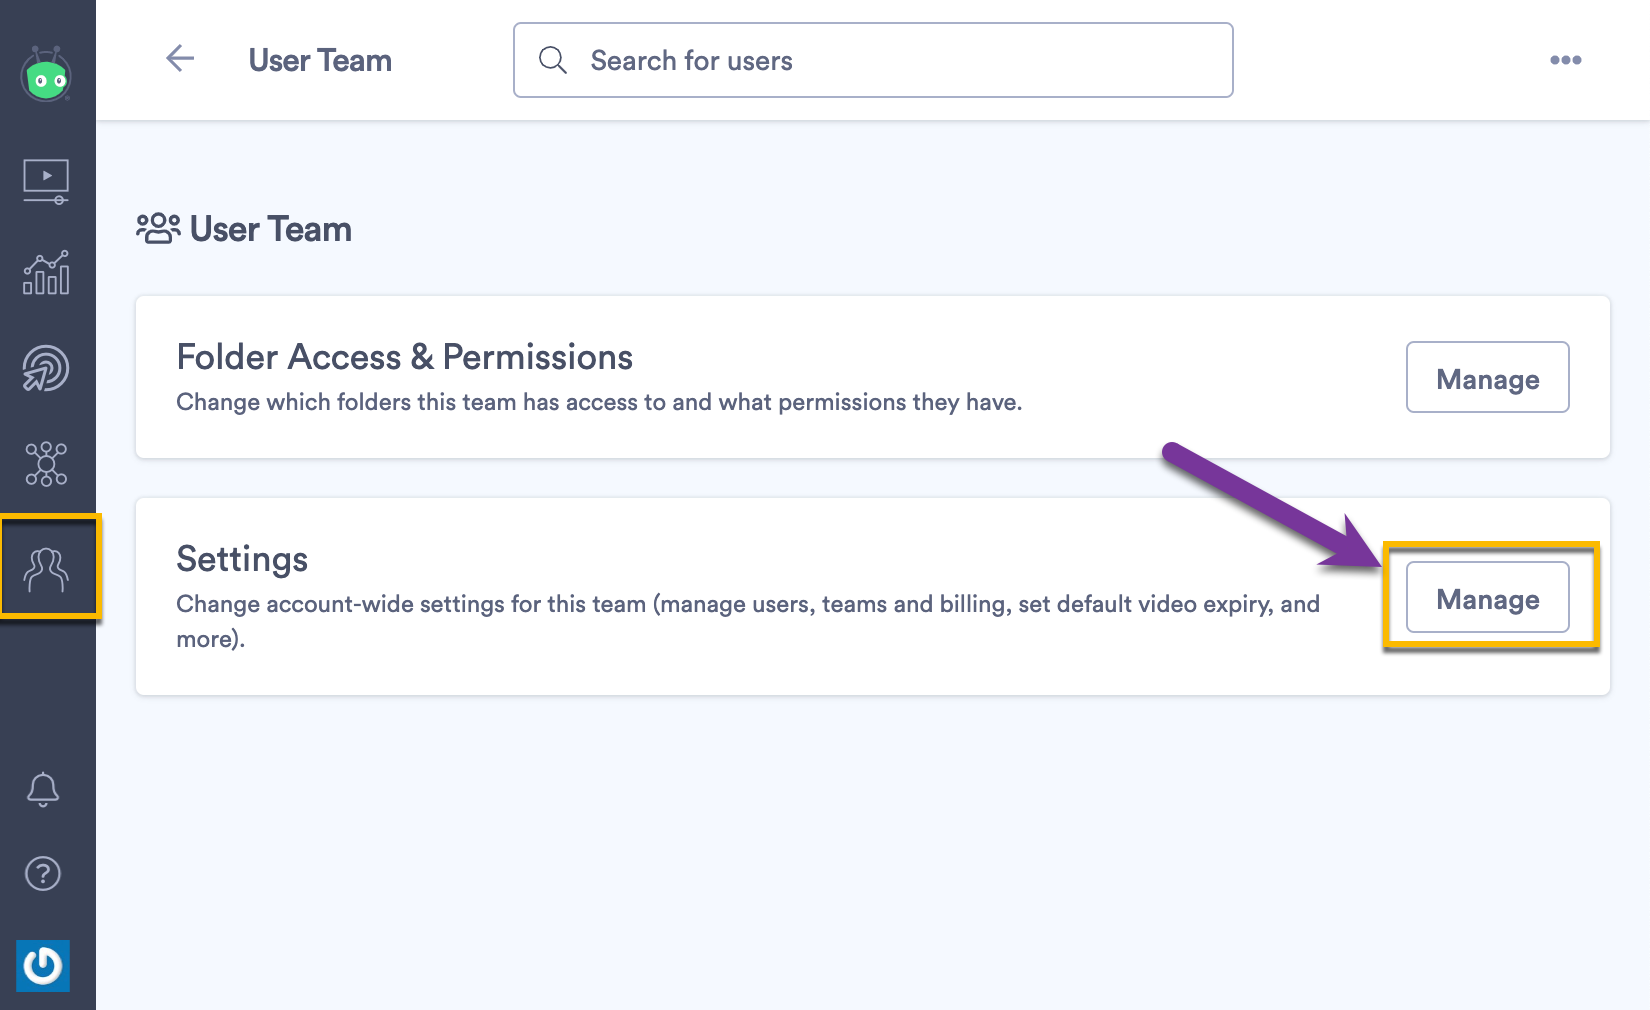 Selecting the manage button to change account-wide permissions in Team Settings